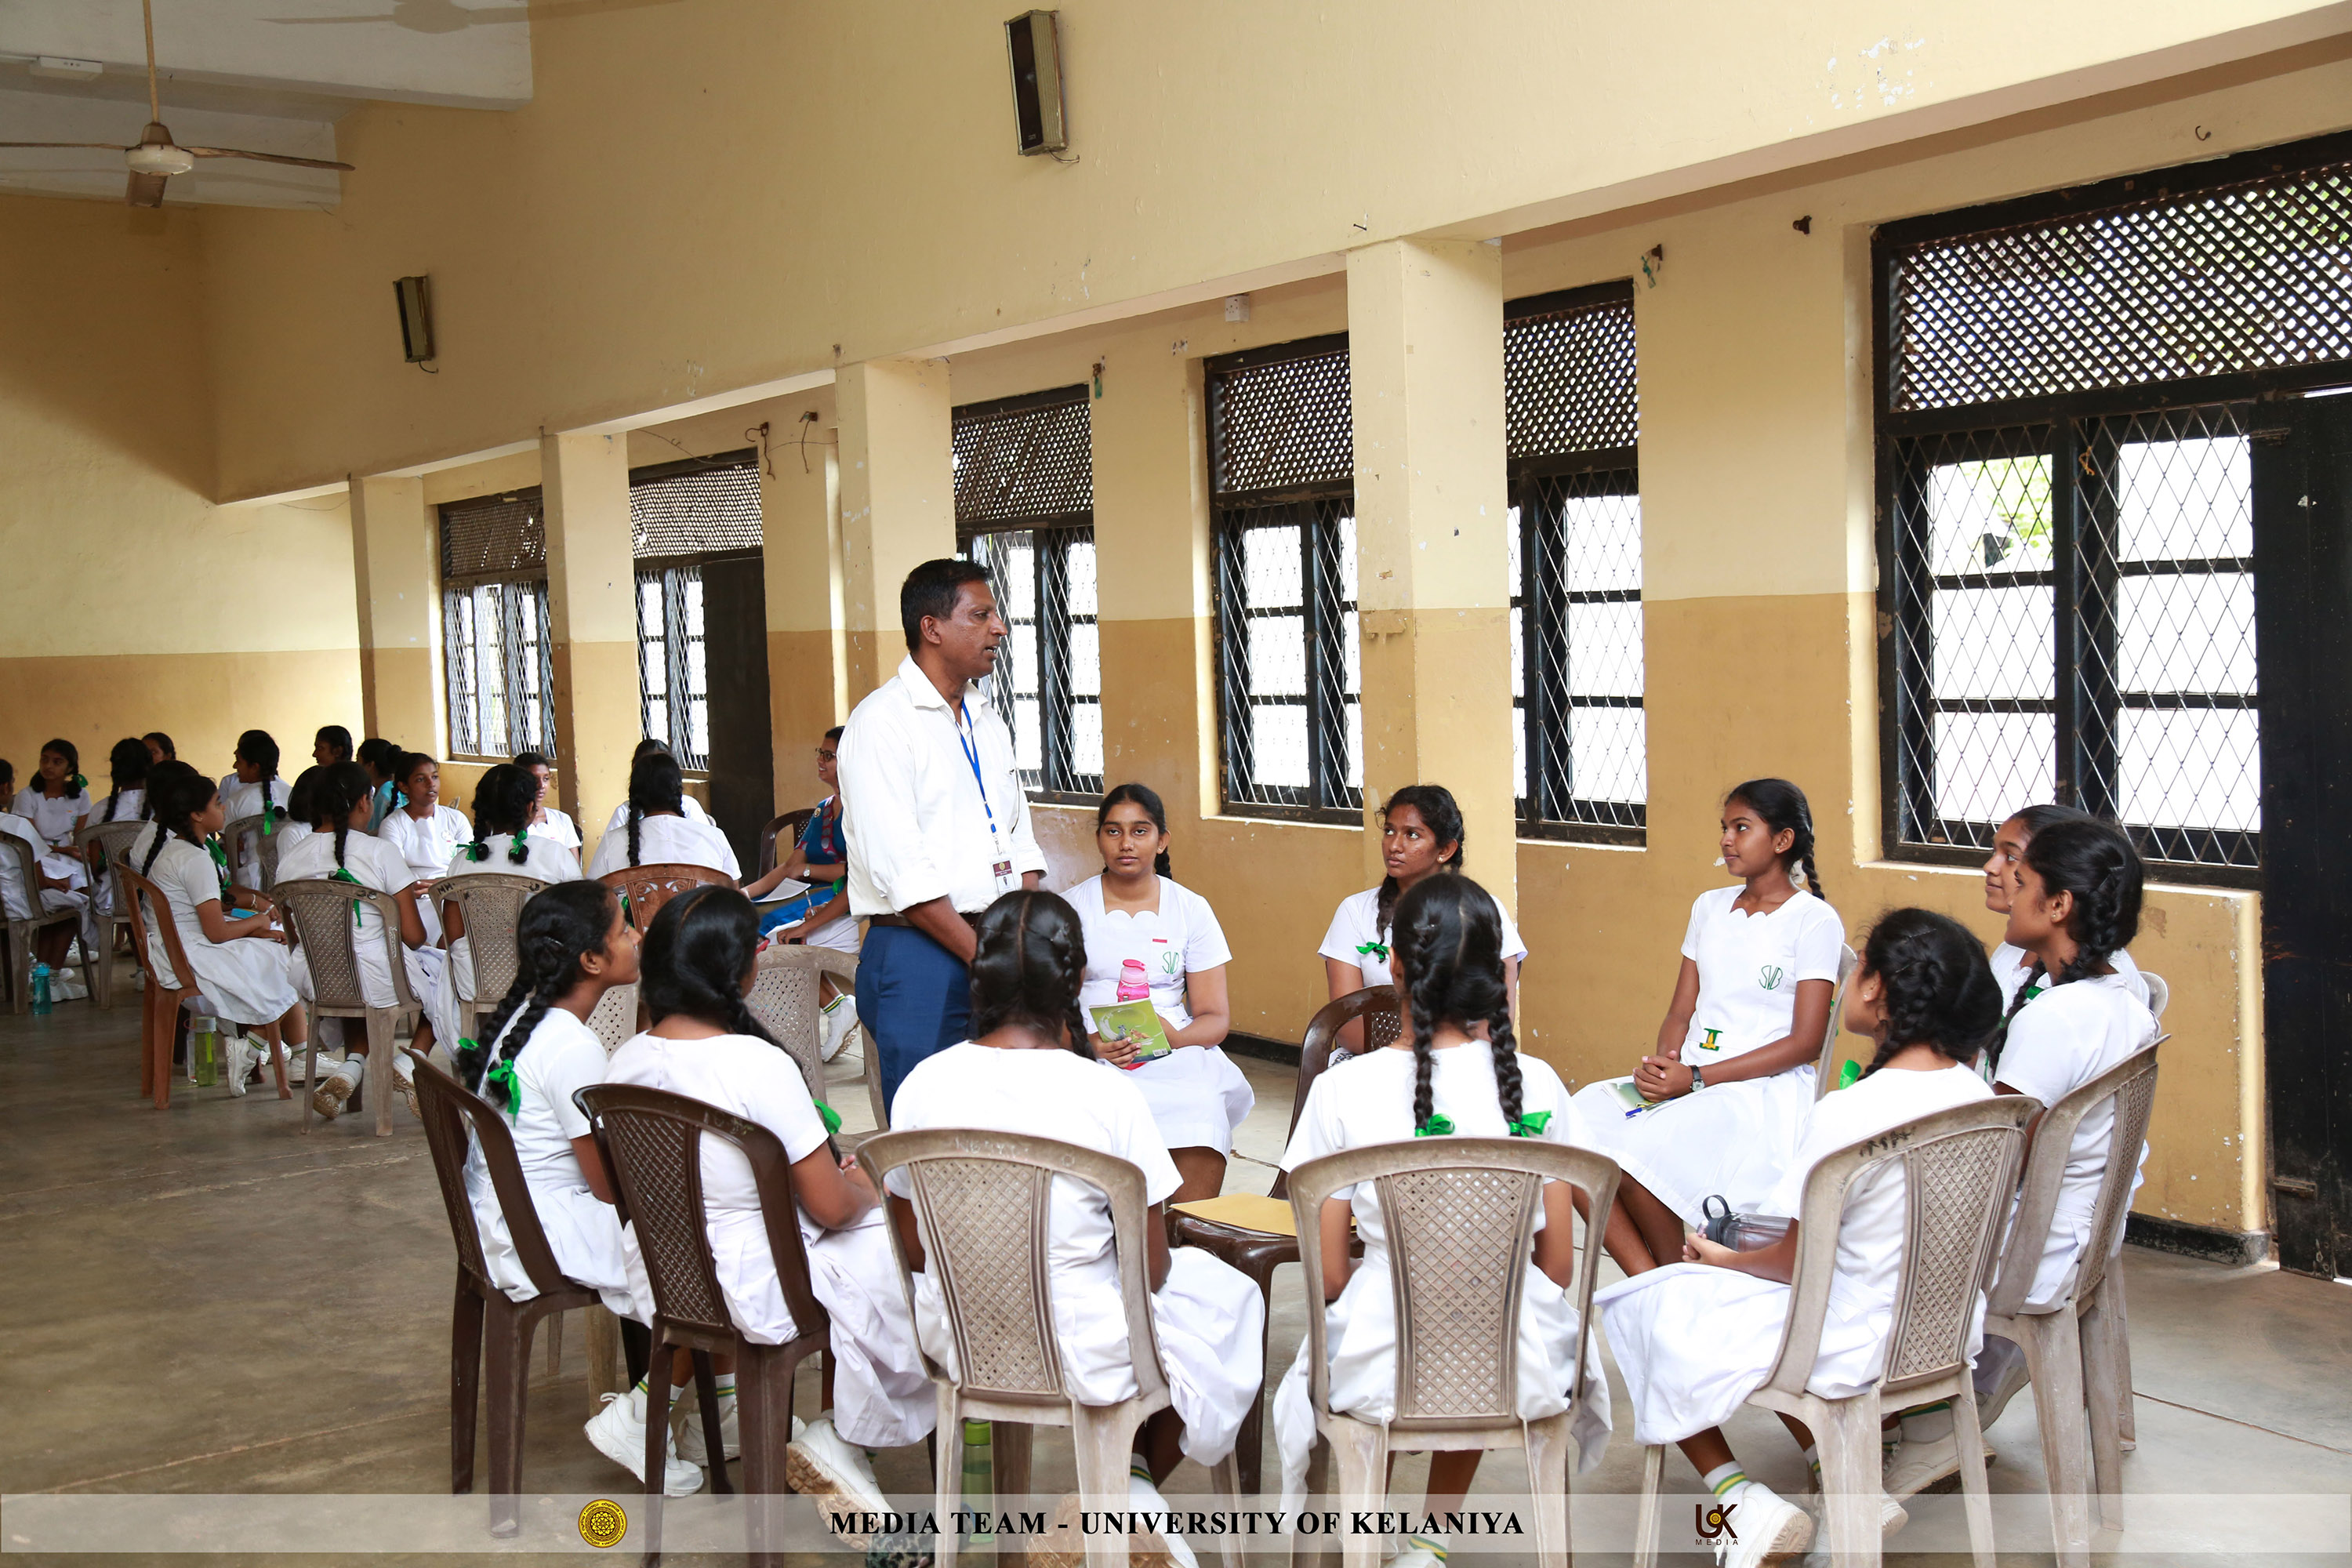 Peer Counselling Workshop to Train University Counsellors and Students